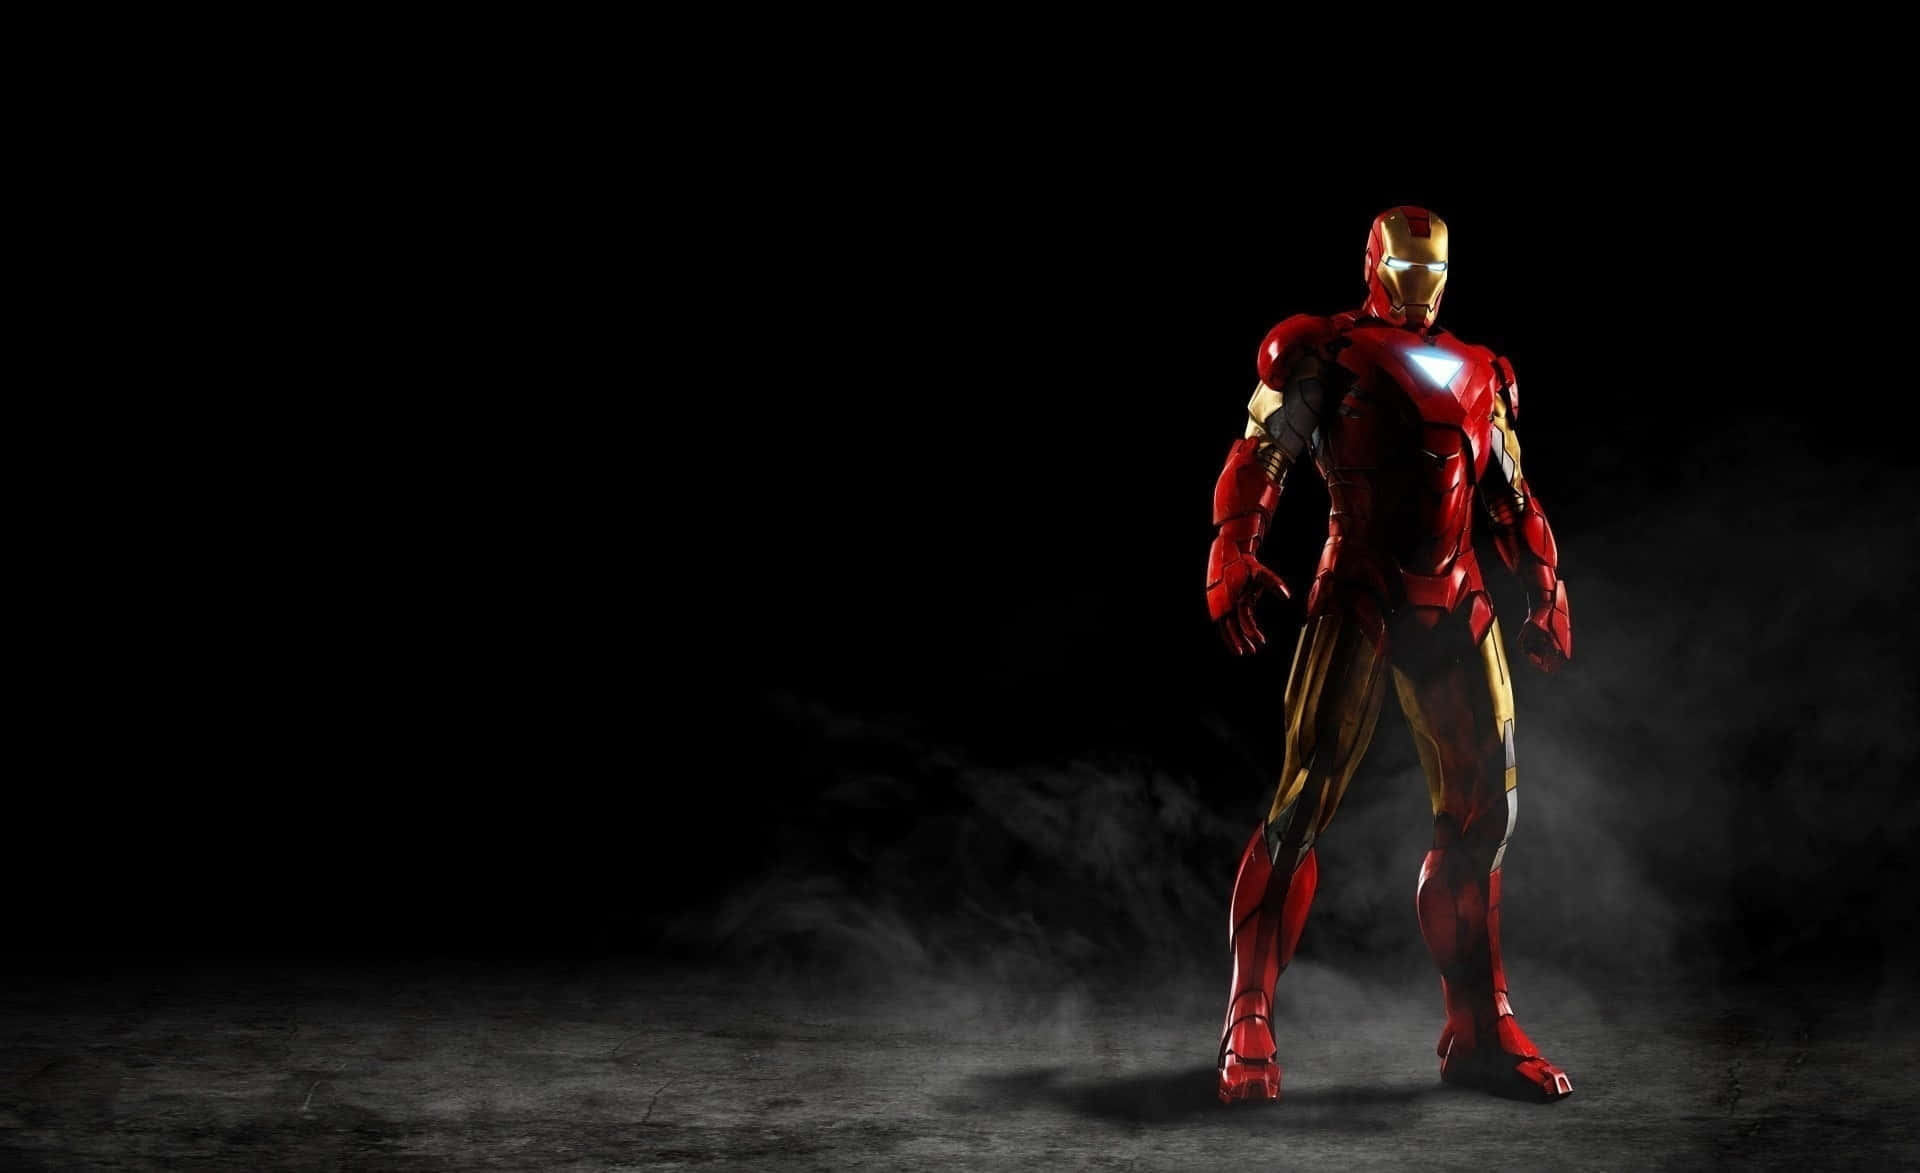 Display your love of the iconic Iron Man with these awesome collectible action figures. Wallpaper